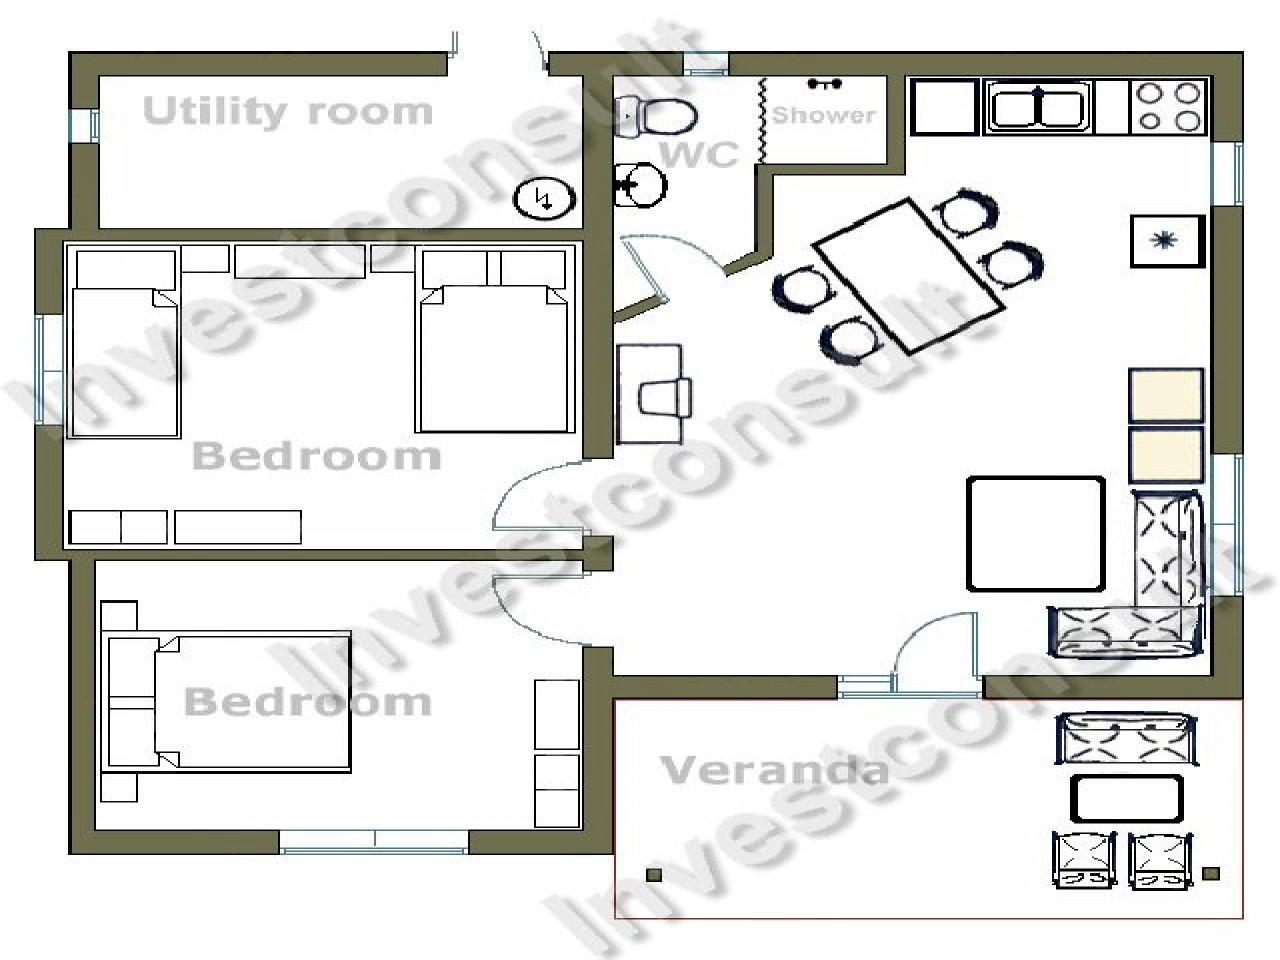 Small 2 Bedroom House Plans
 Small Two Bedroom House Floor Plans Small Two Bedroom